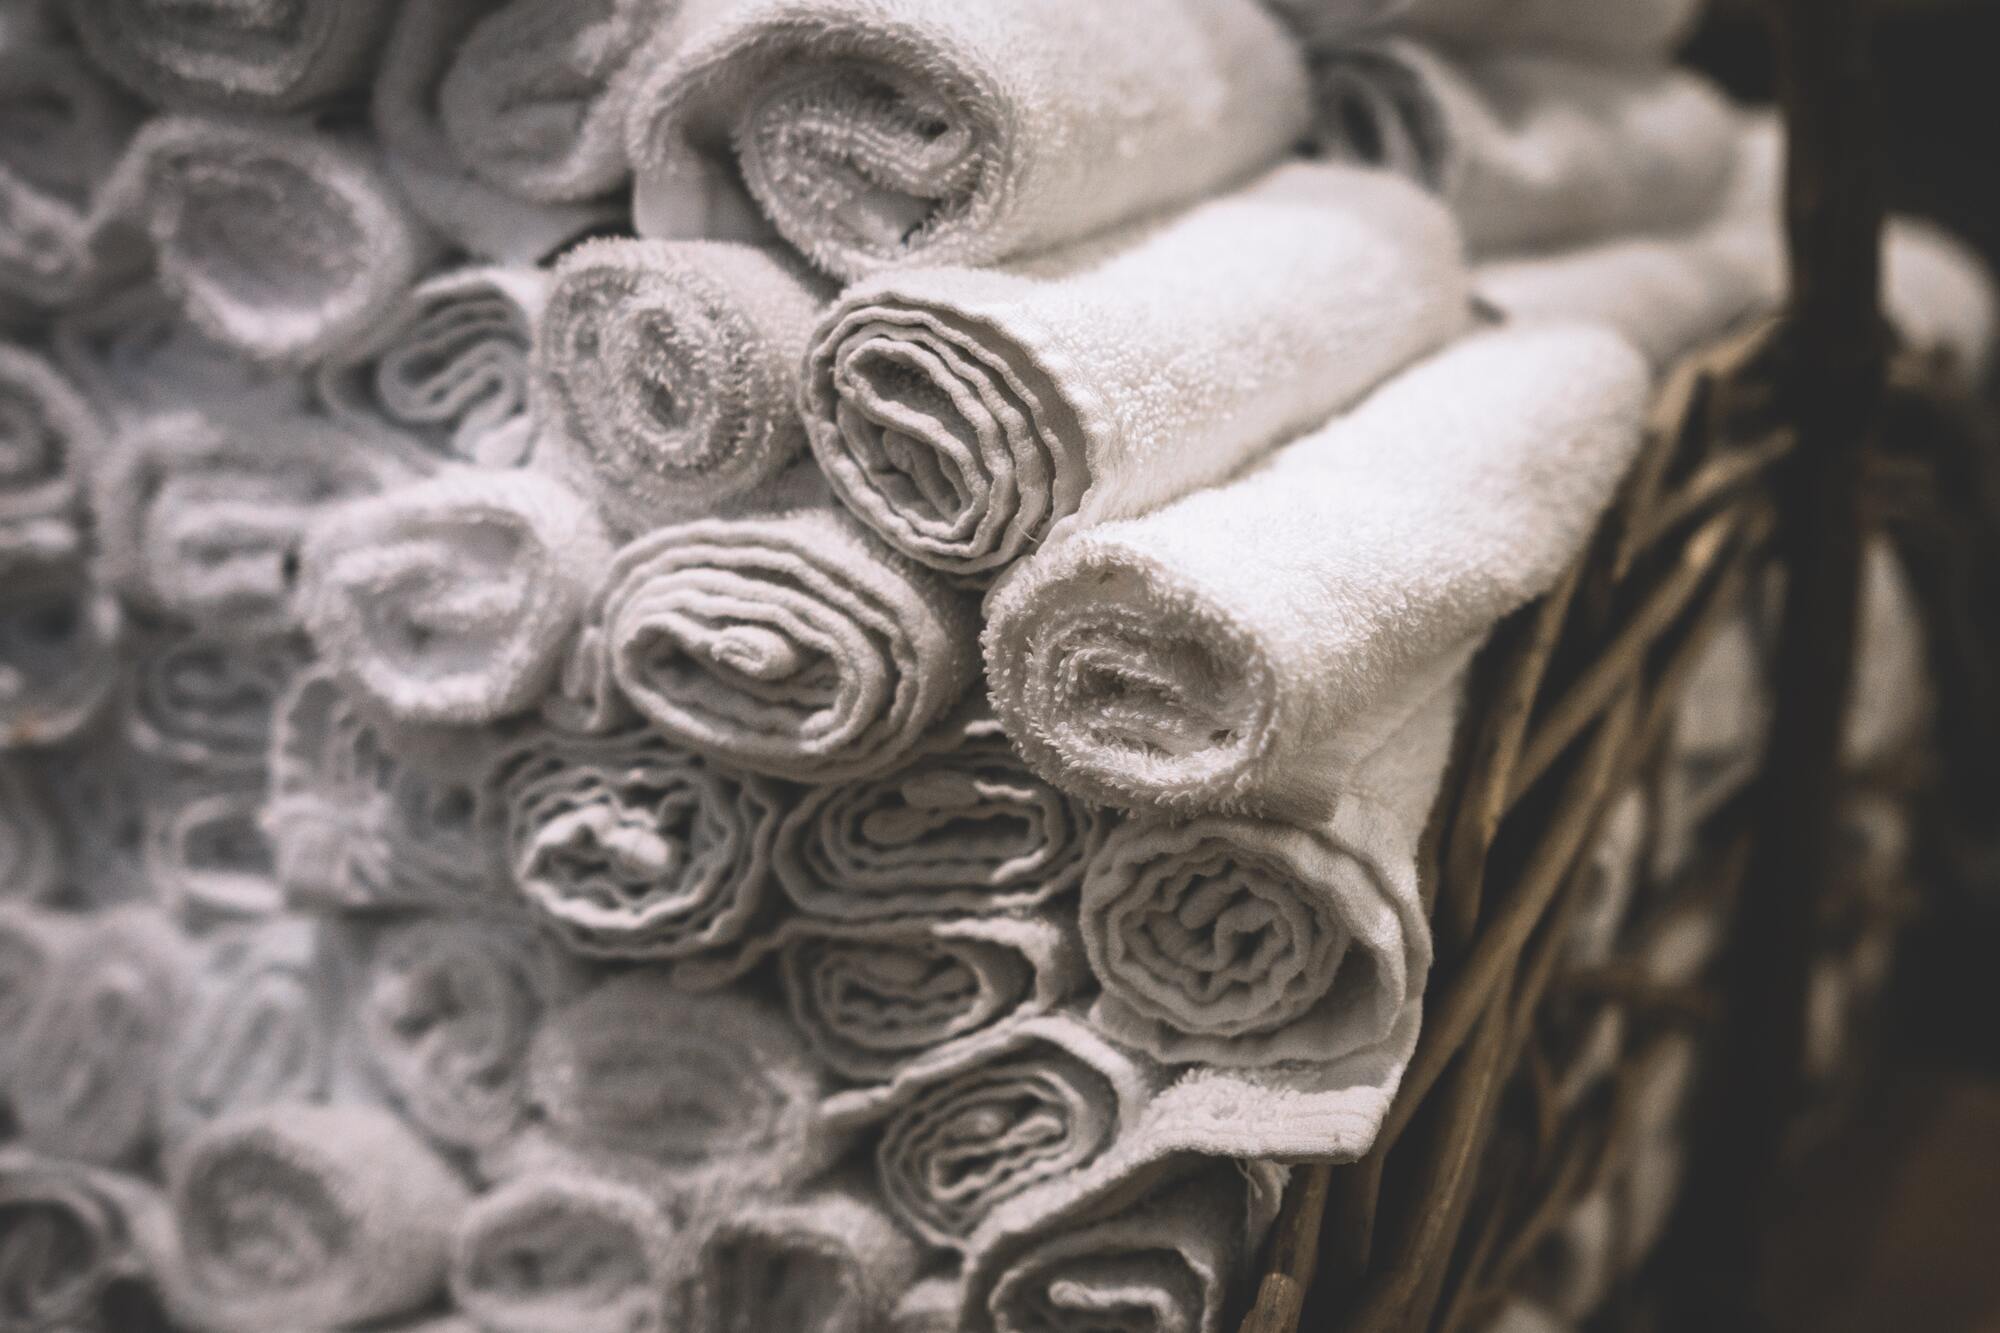 What to wash towels with